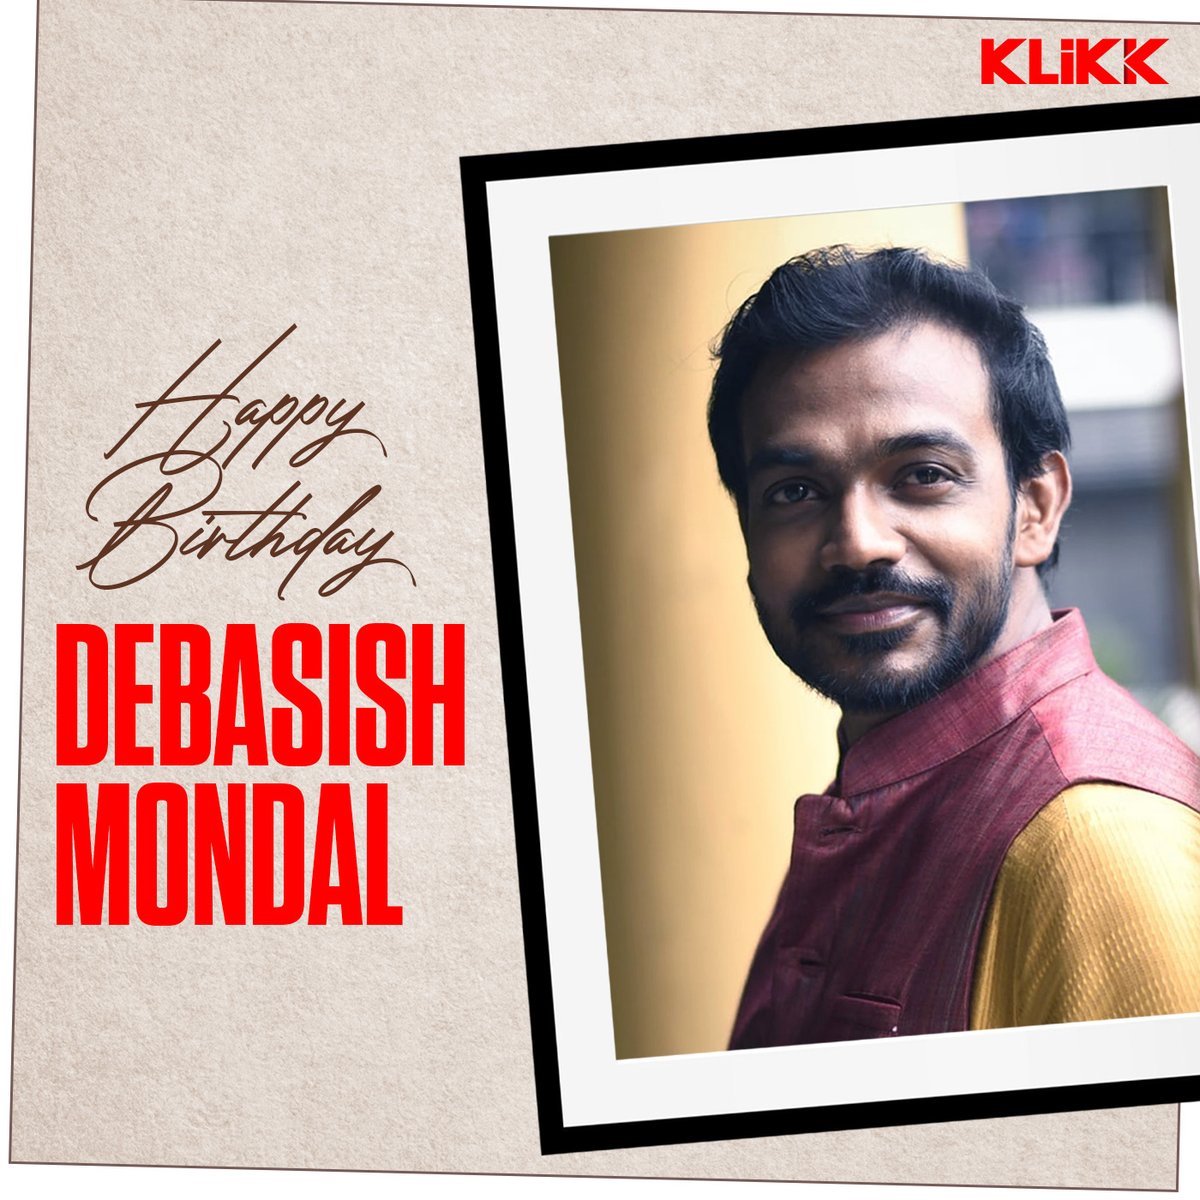 Happy Birthday to the action hero #DebasishMondal 🎂 Your bravery, strength, and determination on screen inspire us all. May your day be as epic and thrilling as your incredible performances. Wishing you a year of success ahead! 🎉✨
#Klikk